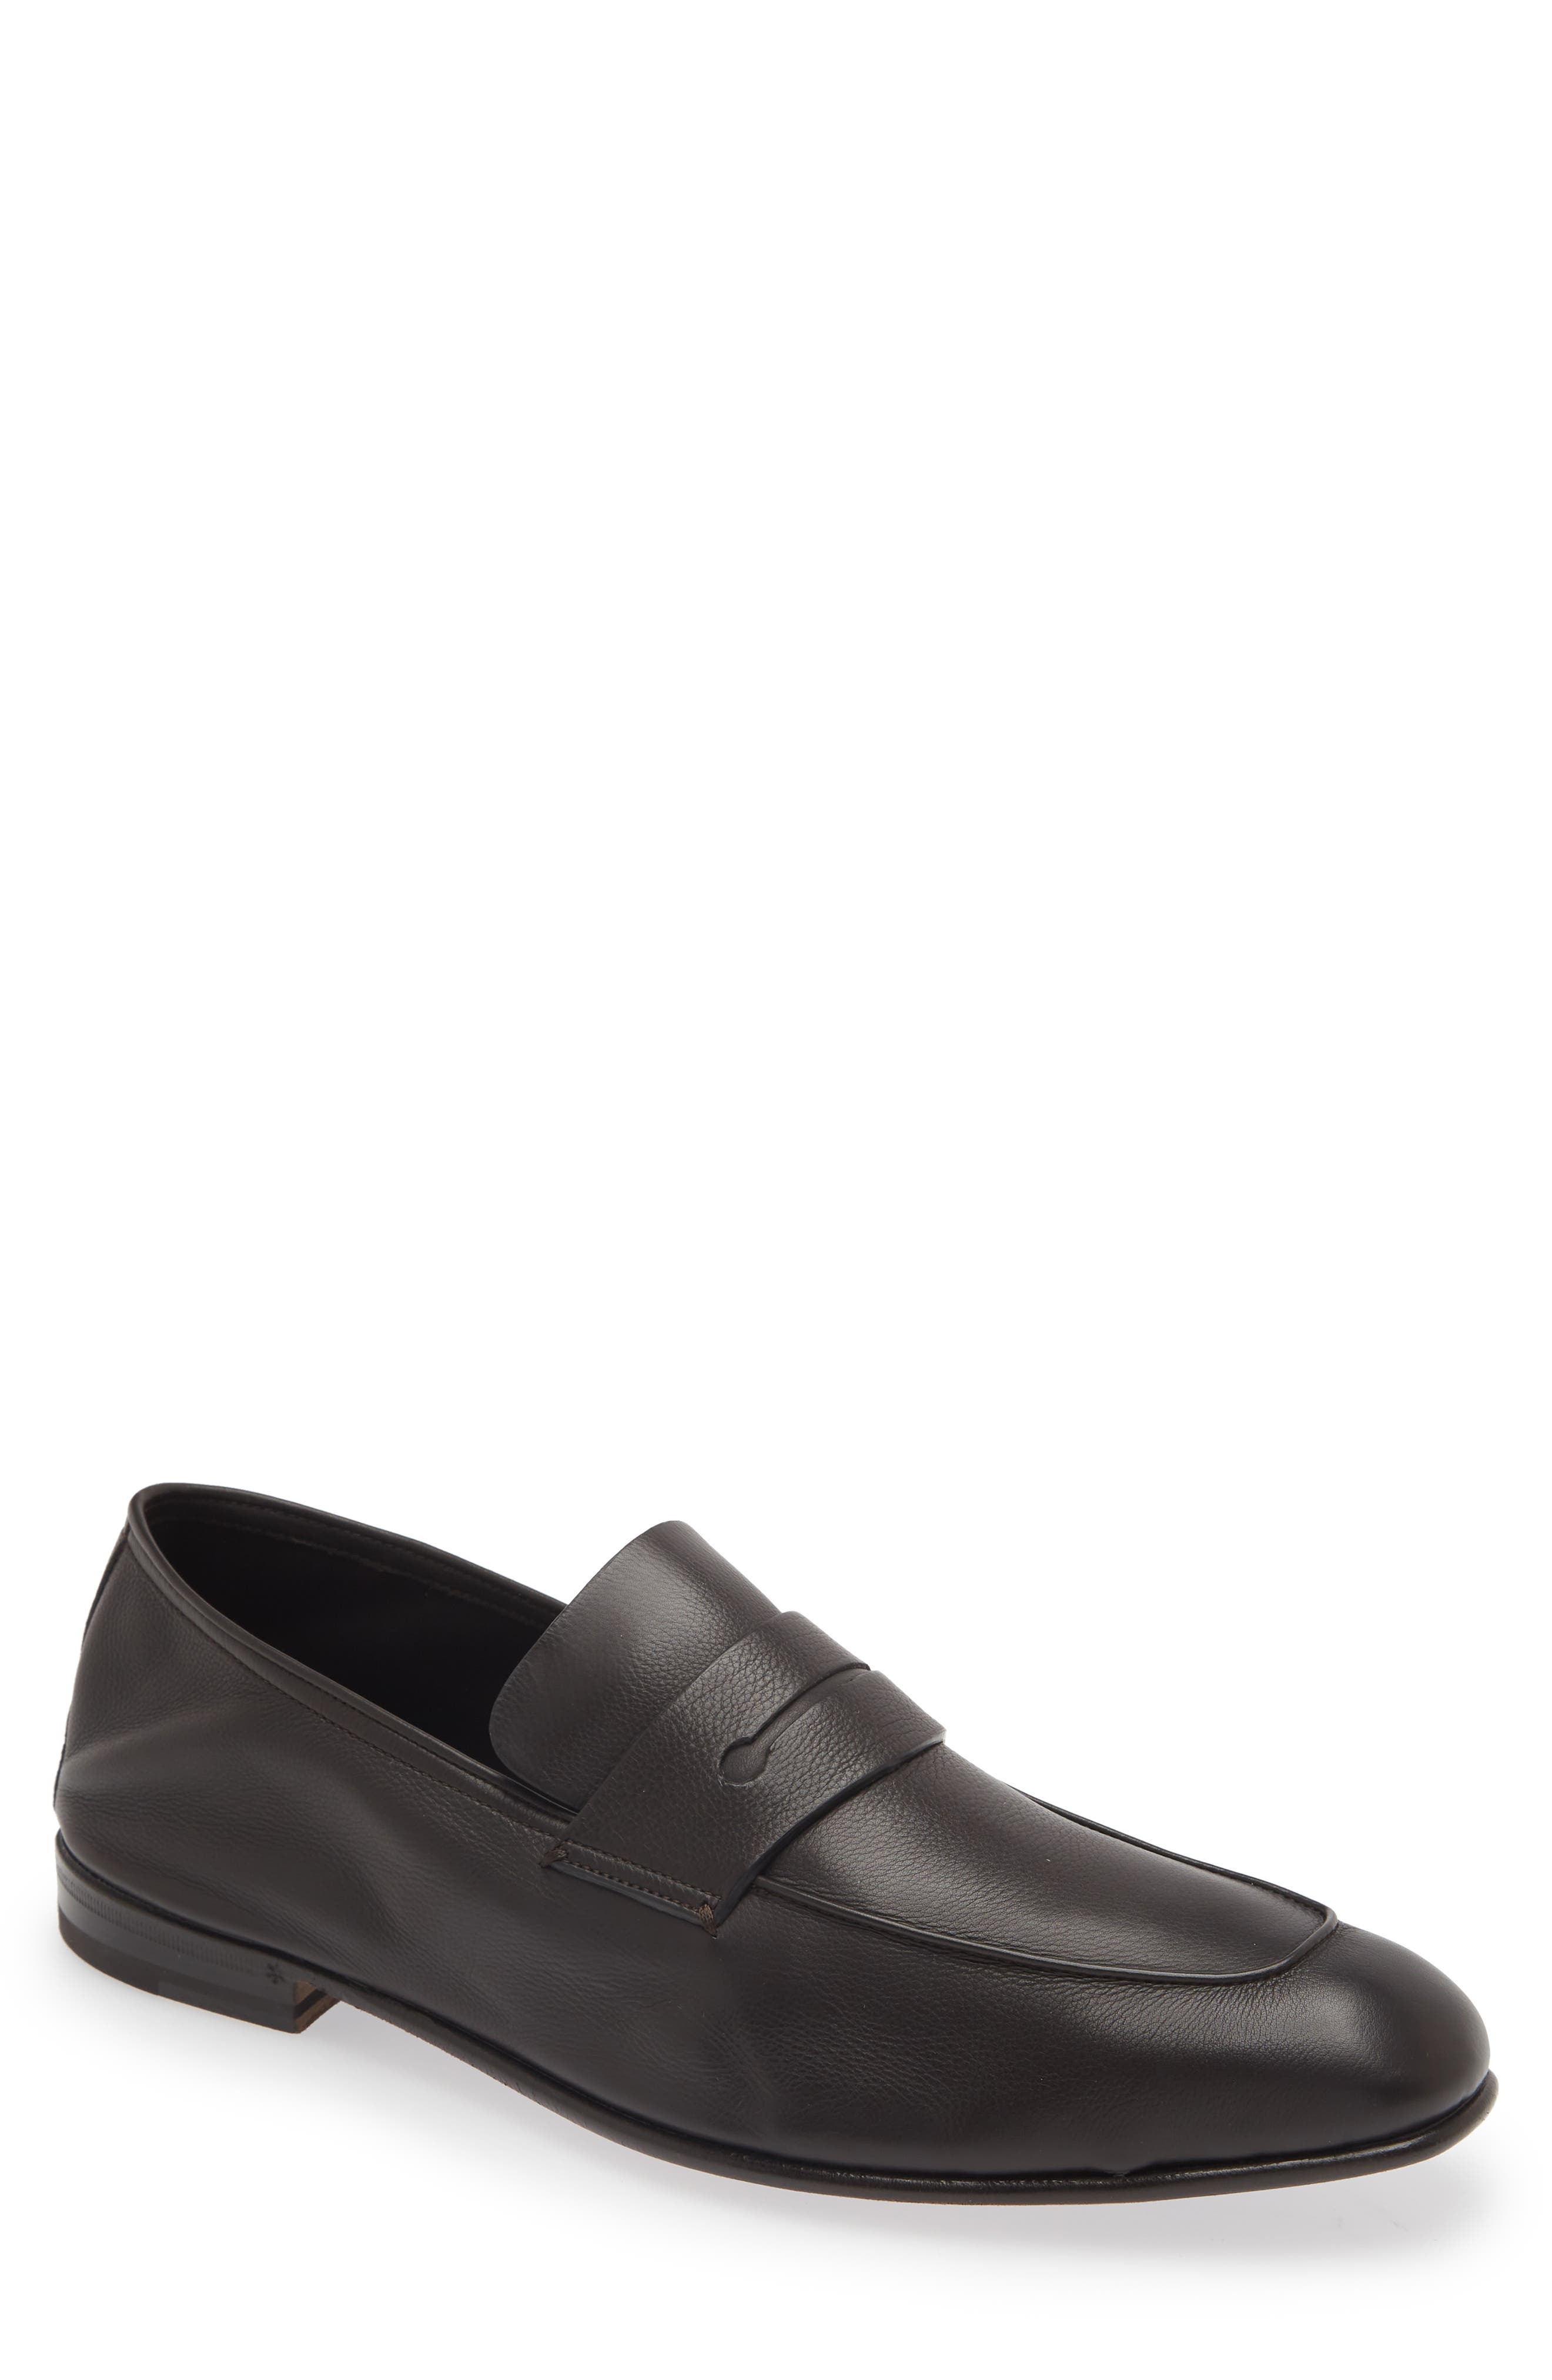 Zegna L'Asola suede loafers - Brown